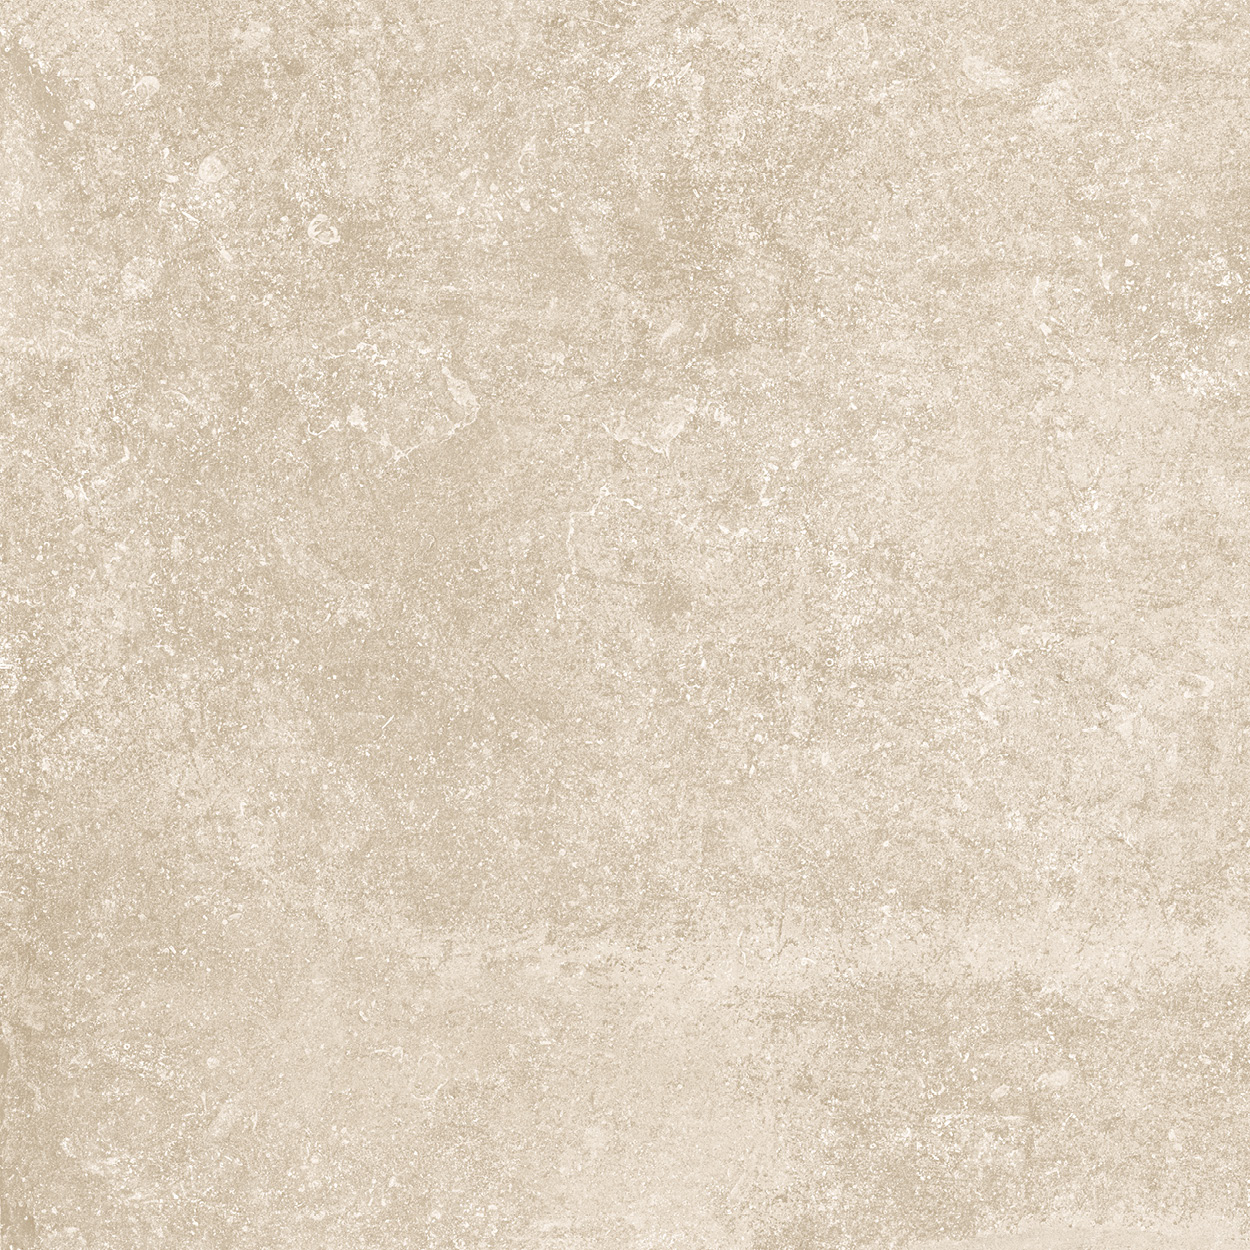 12 x 24 Marwari Clay rectified porcelain tile (SPECIAL ORDER)